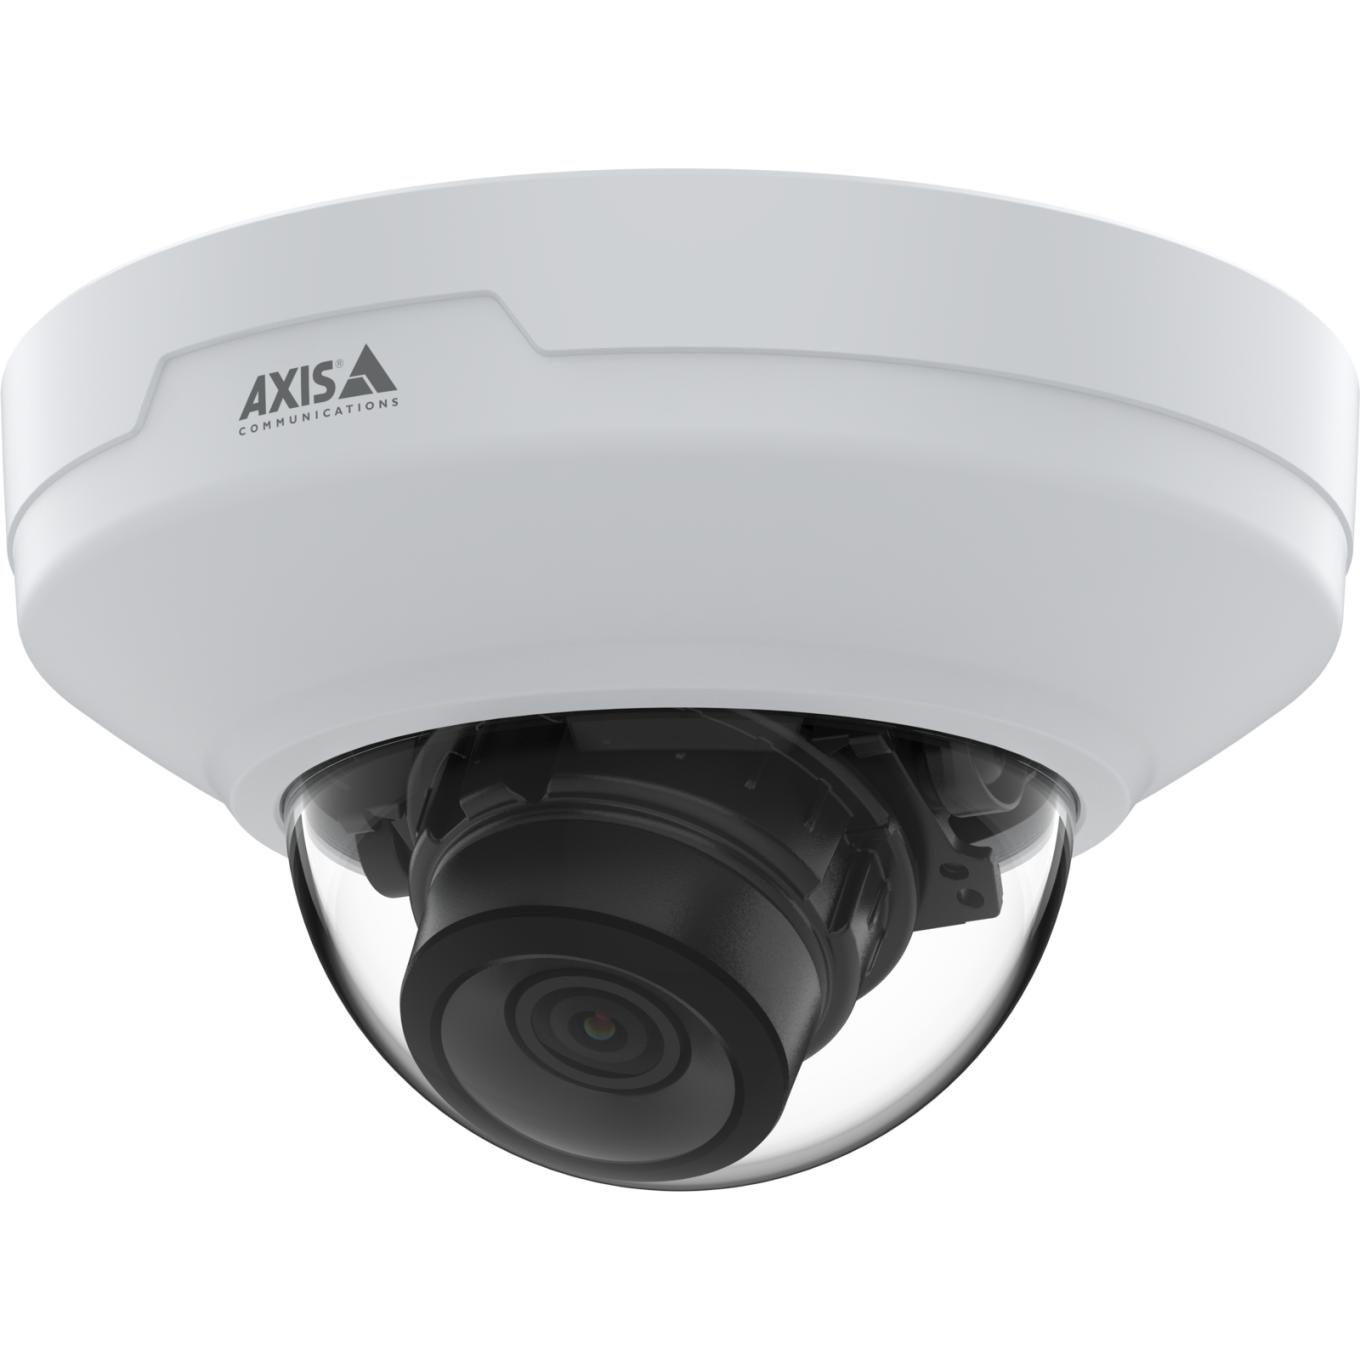 AXIS M4215-LV Dome Camera、左から見た図